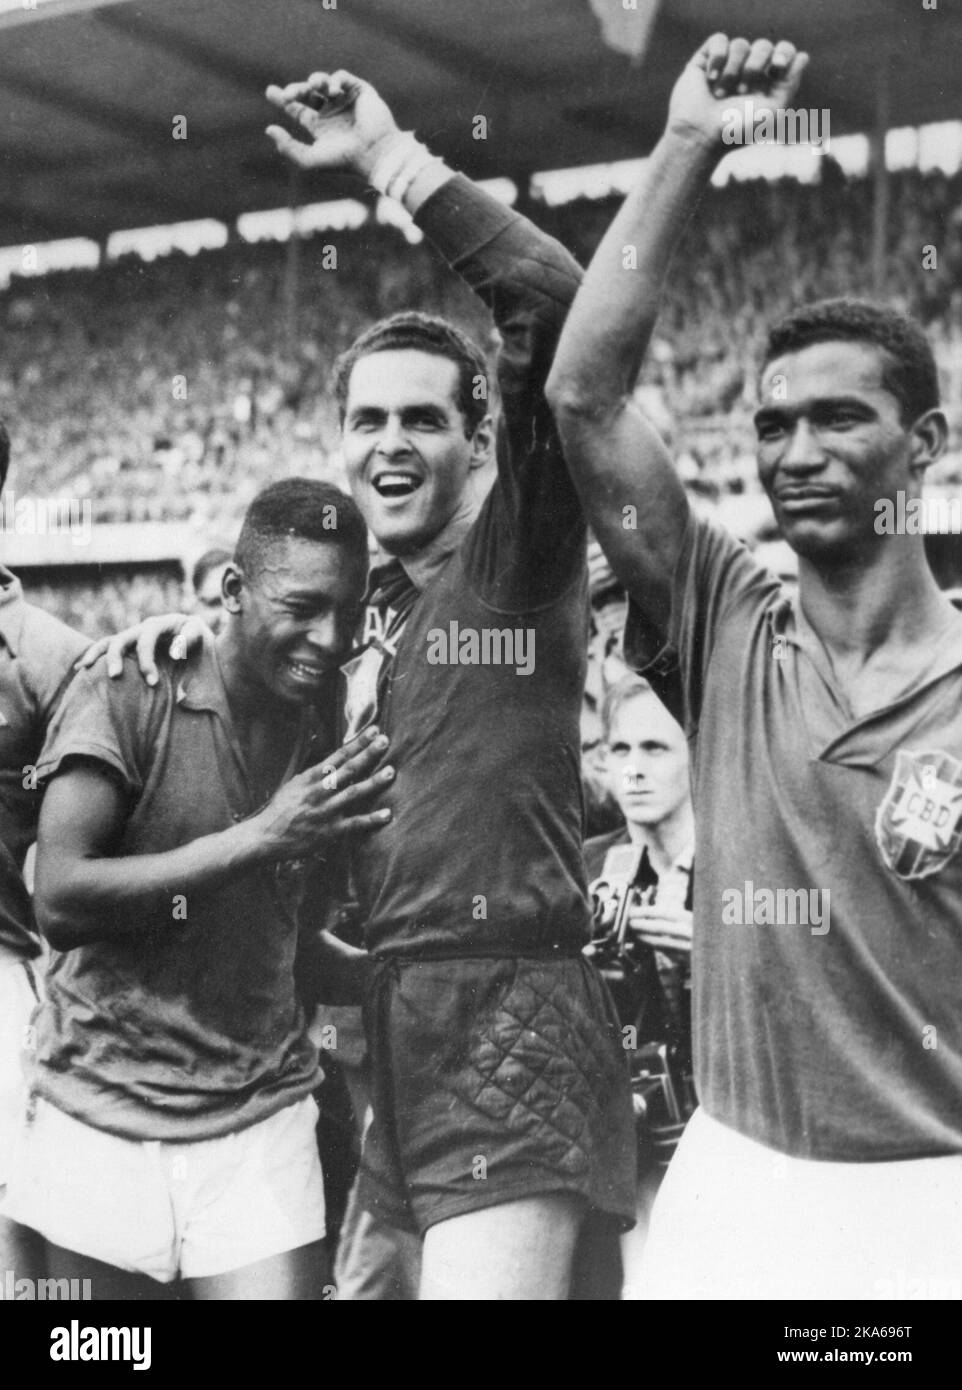 FILE - In this June 29, 1958 file photo Brazil's 17 year-old Pele, left, weeps on the shoulder of goalkeeper Gilmar Dos Santos Neves, after Brazil's 5-2 victory over Sweden in their World Cup final soccer match, in Stockholm, Sweden. Brazil's Didi is at right. On this day: Brazil wins it first World Cup with Pele scoring twice. (AP Photo/File) Stock Photo